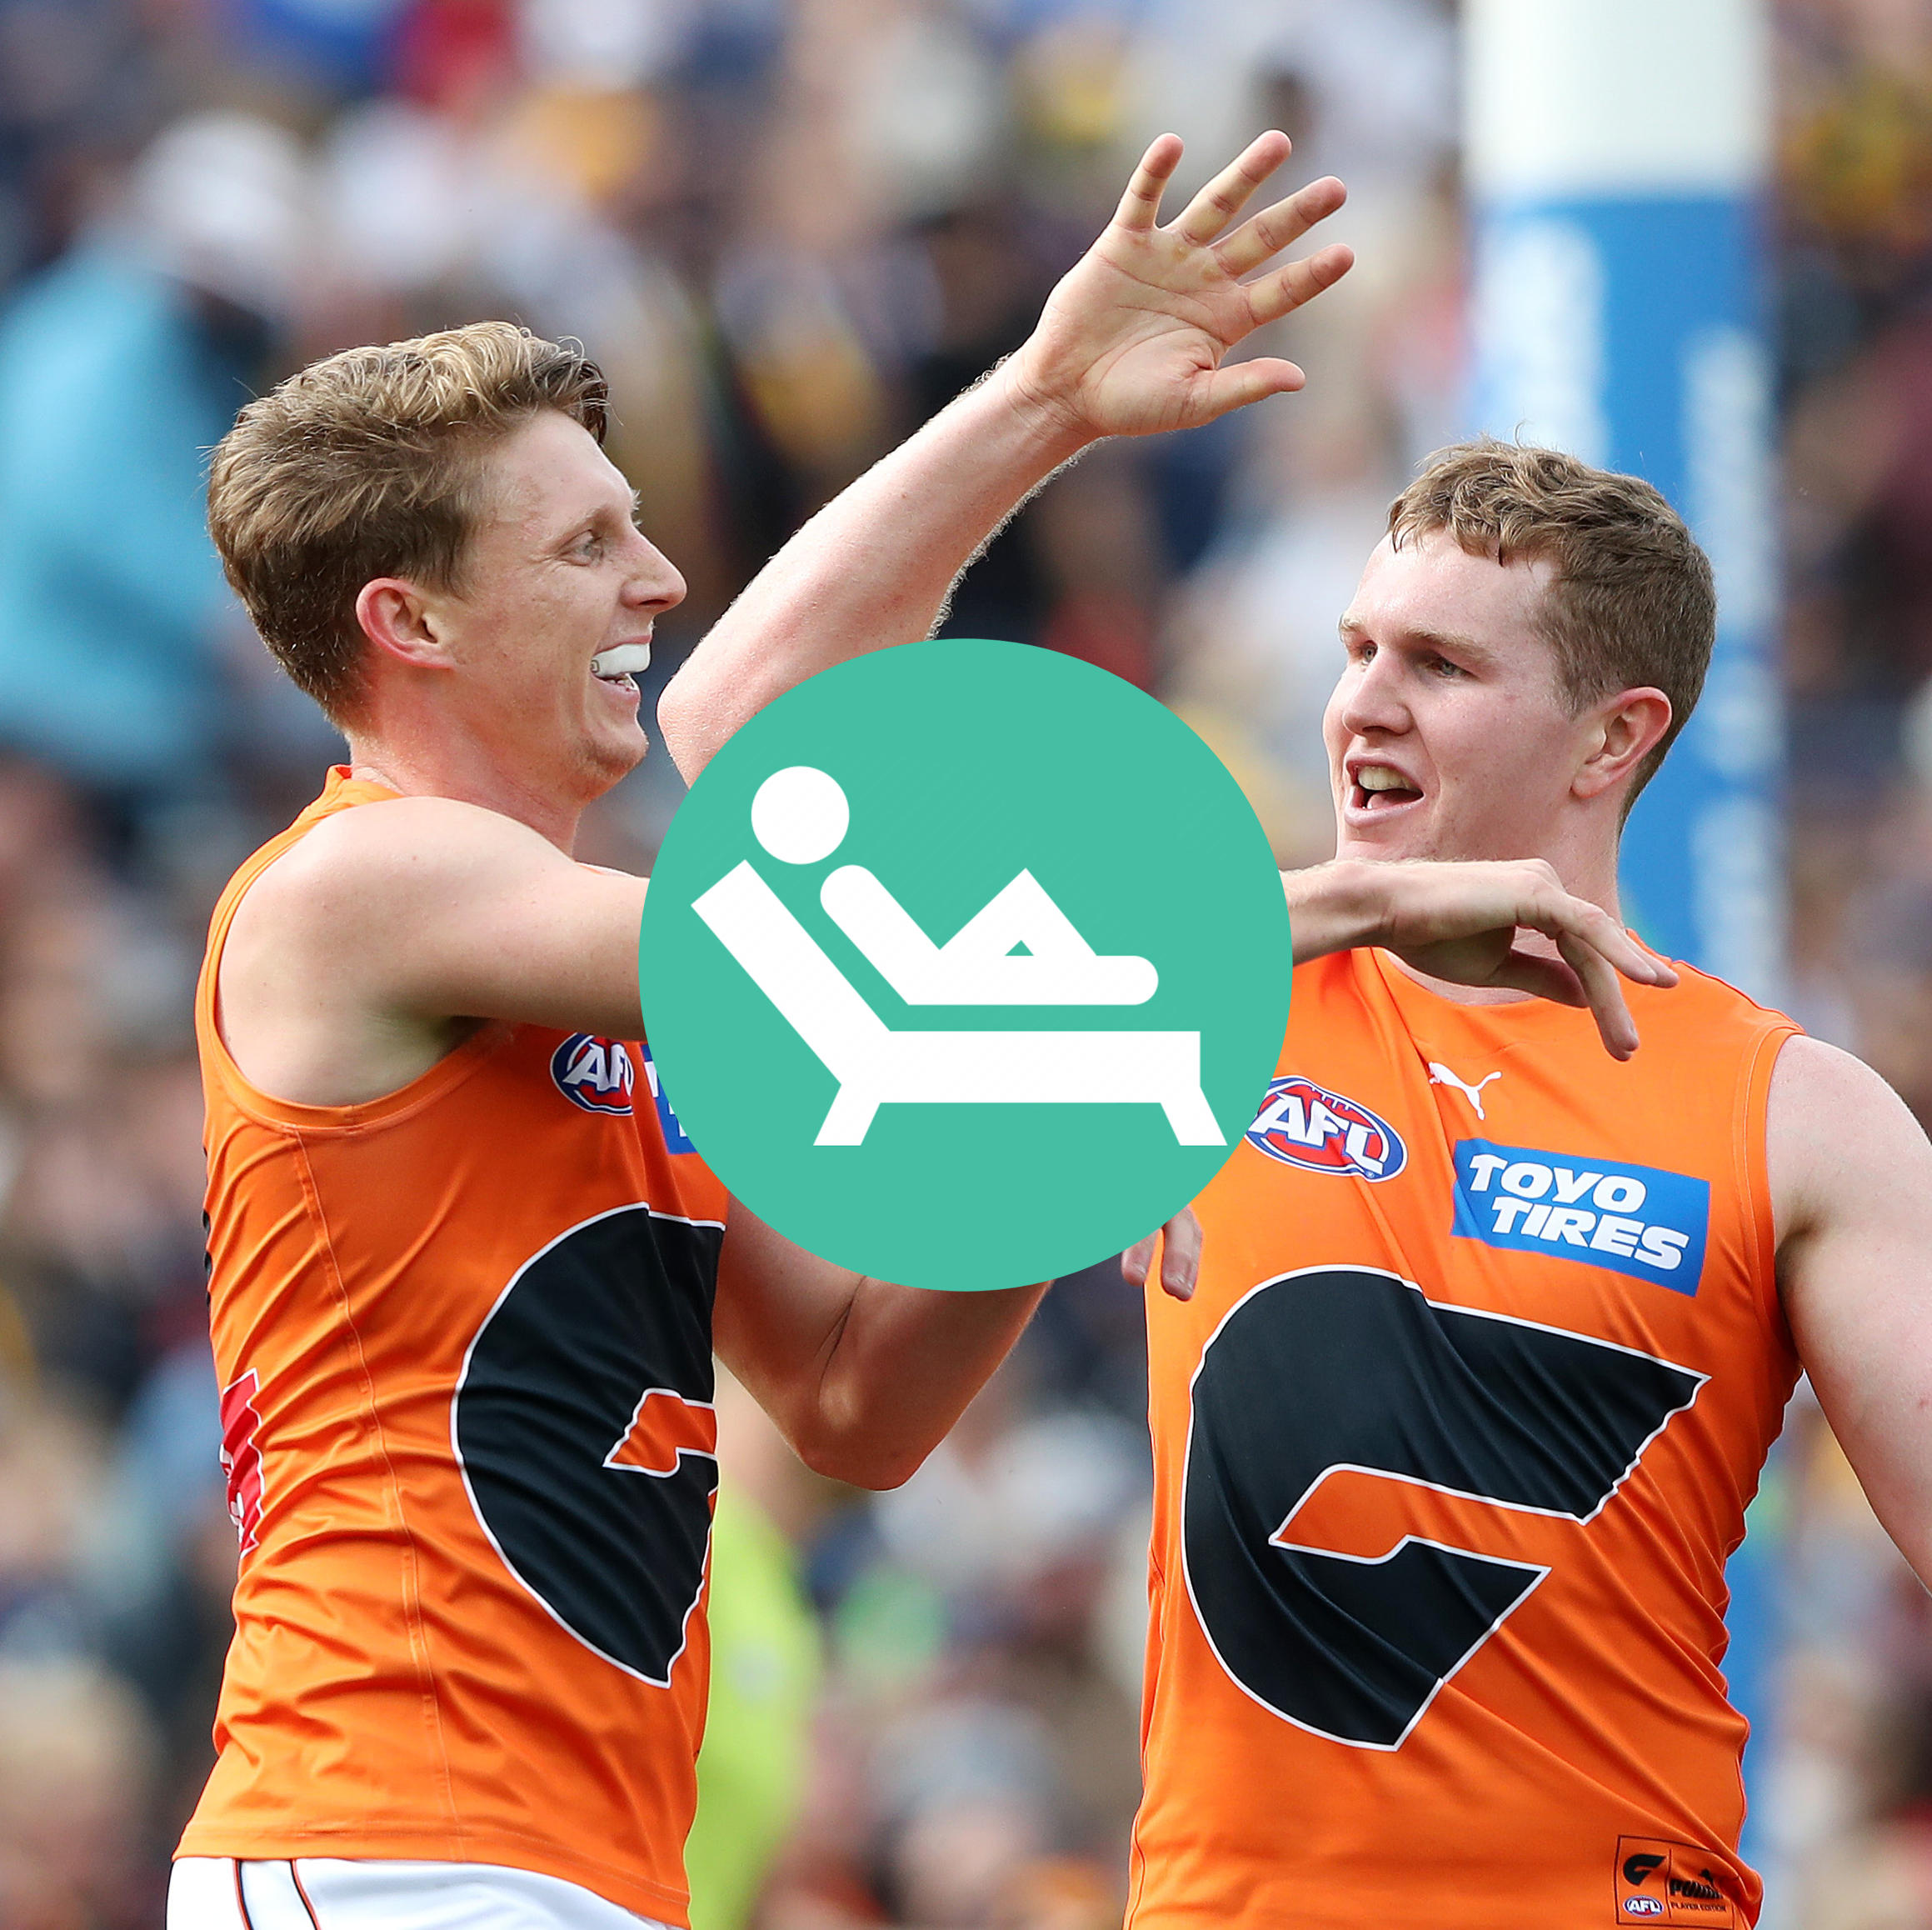 GWS/GC bye, Sexton forward, Fyfe subbed, Daicos quiet, fixing issues